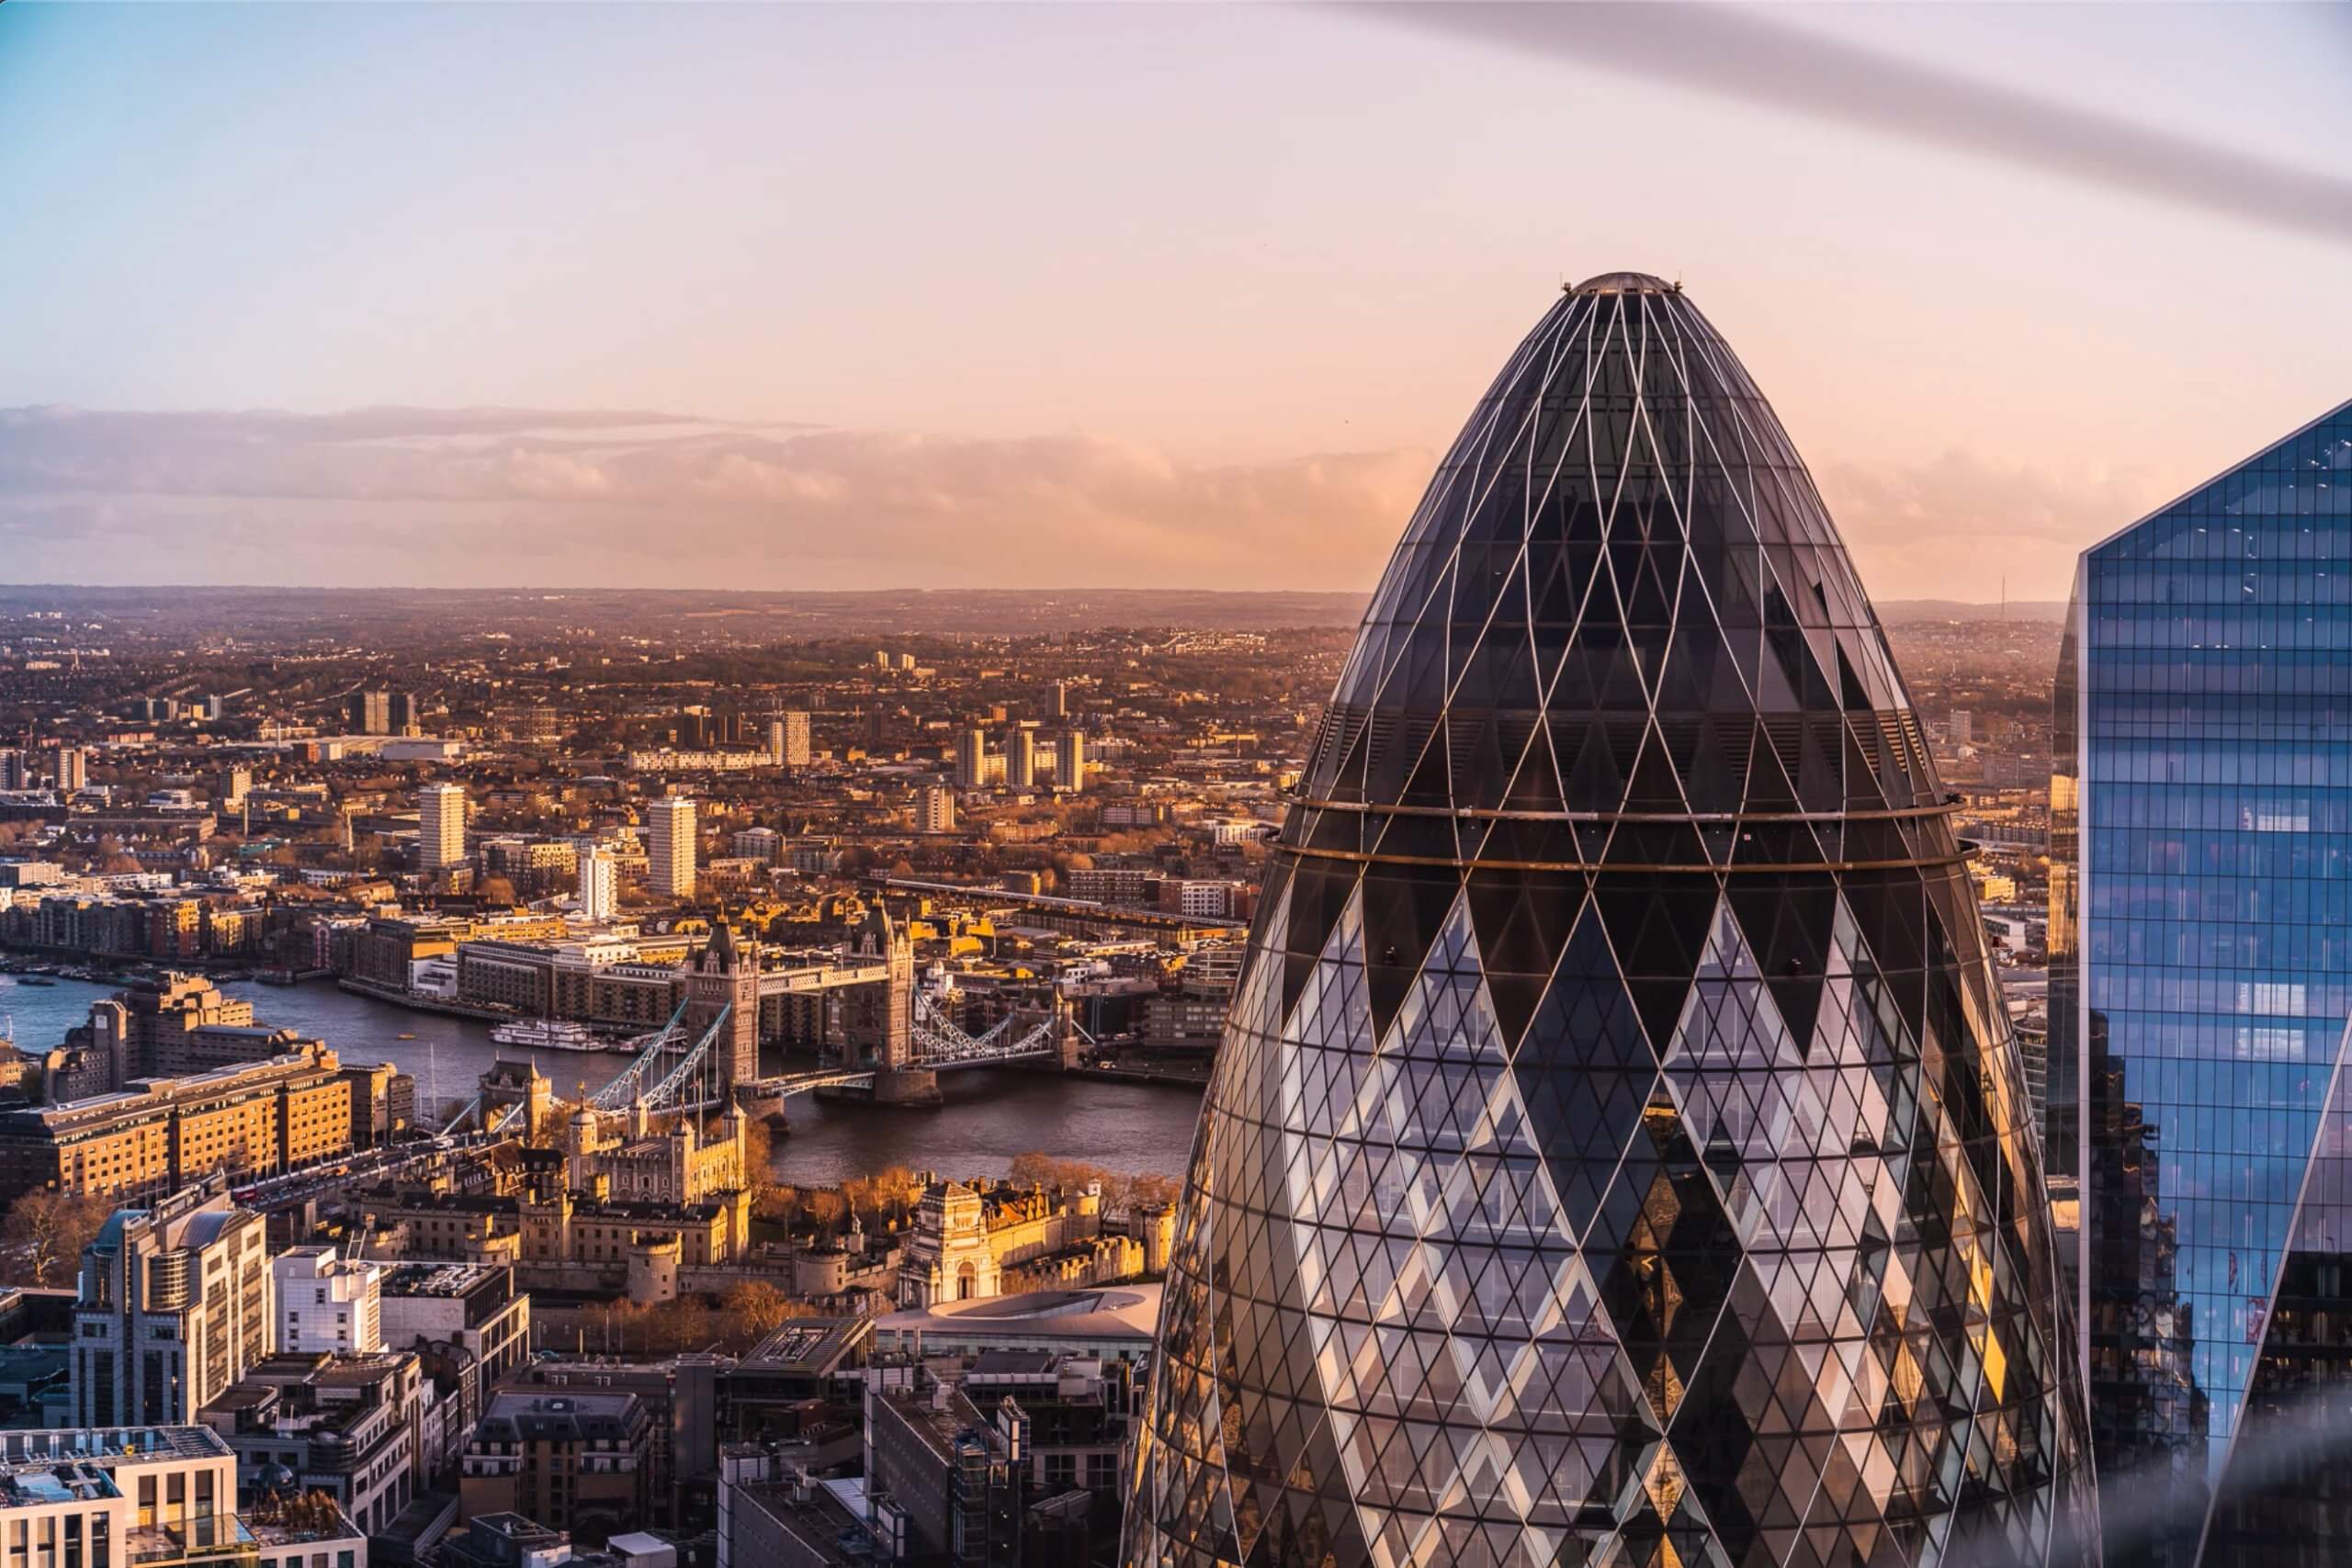 Make It A Magnum - Searcys at the Gherkin